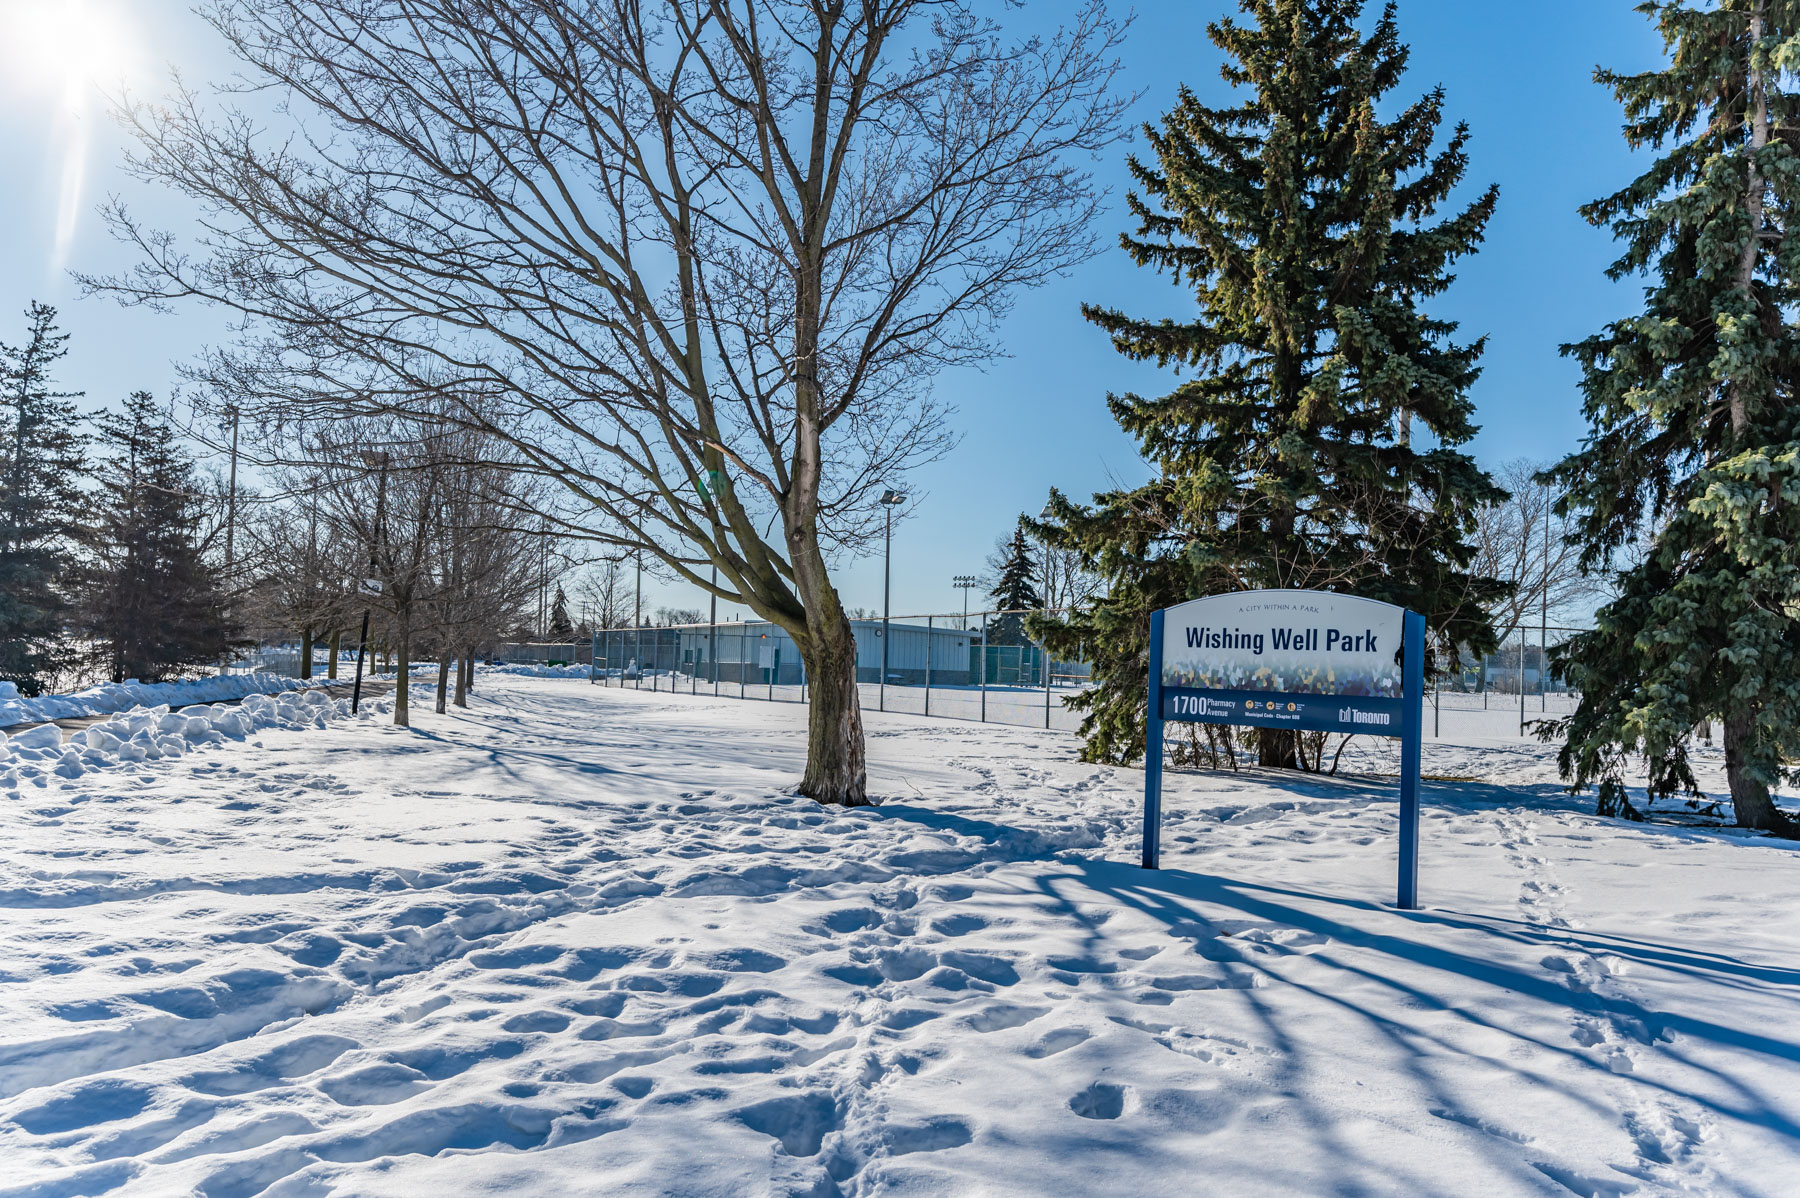 Trees, snow and Wishing Well Park sign.